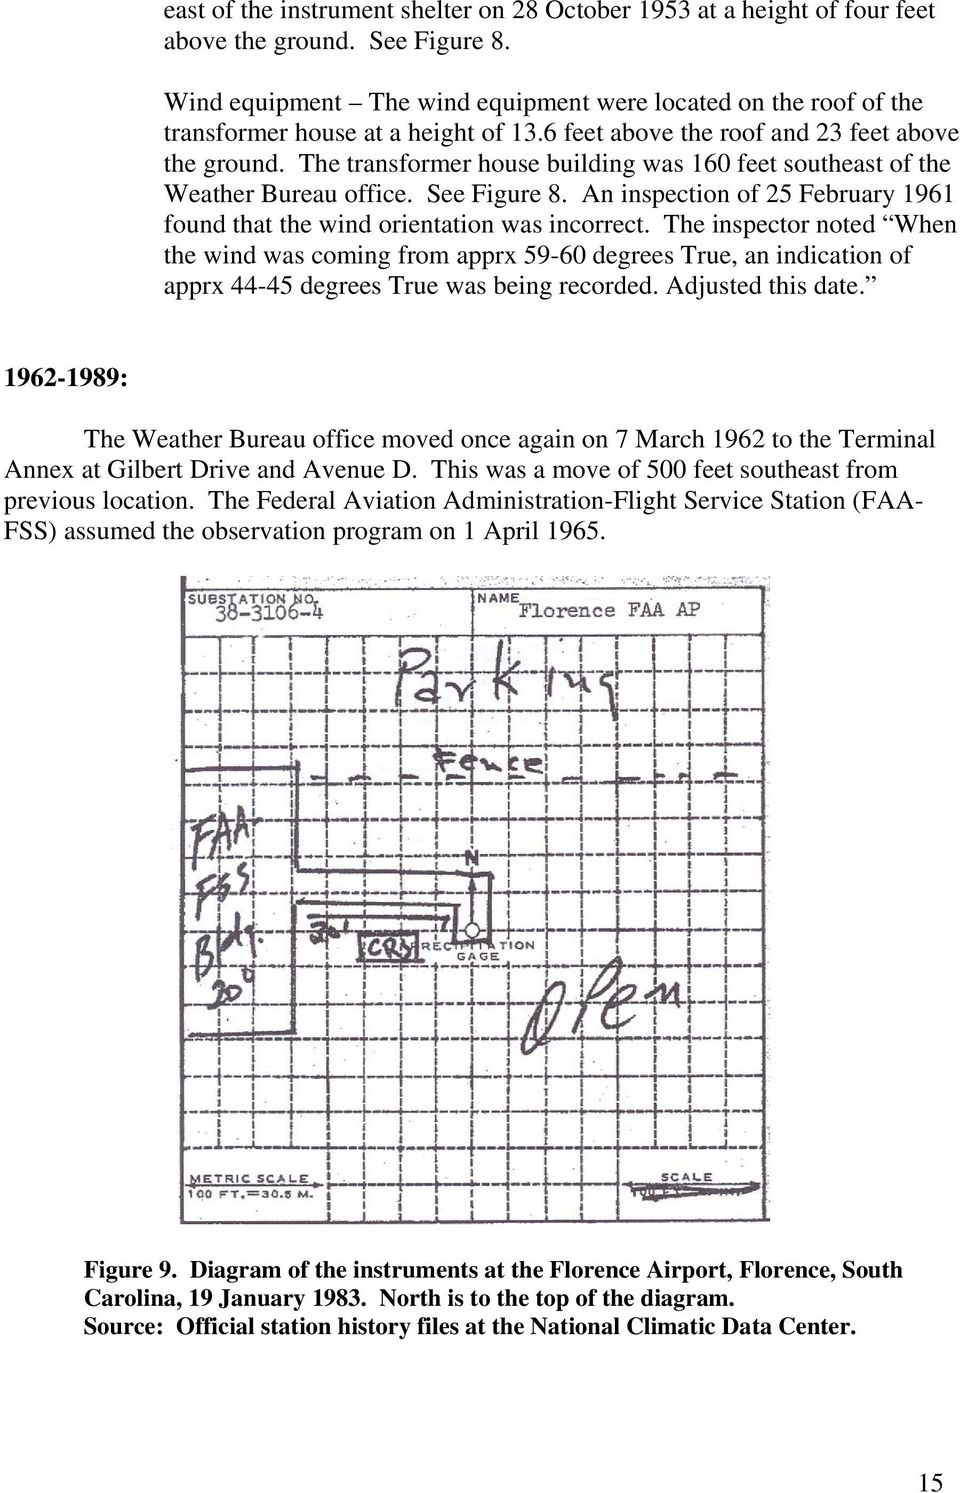 The transformer house building was 160 feet southeast of the Weather Bureau office. See Figure 8. An inspection of 25 February 1961 found that the wind orientation was incorrect.